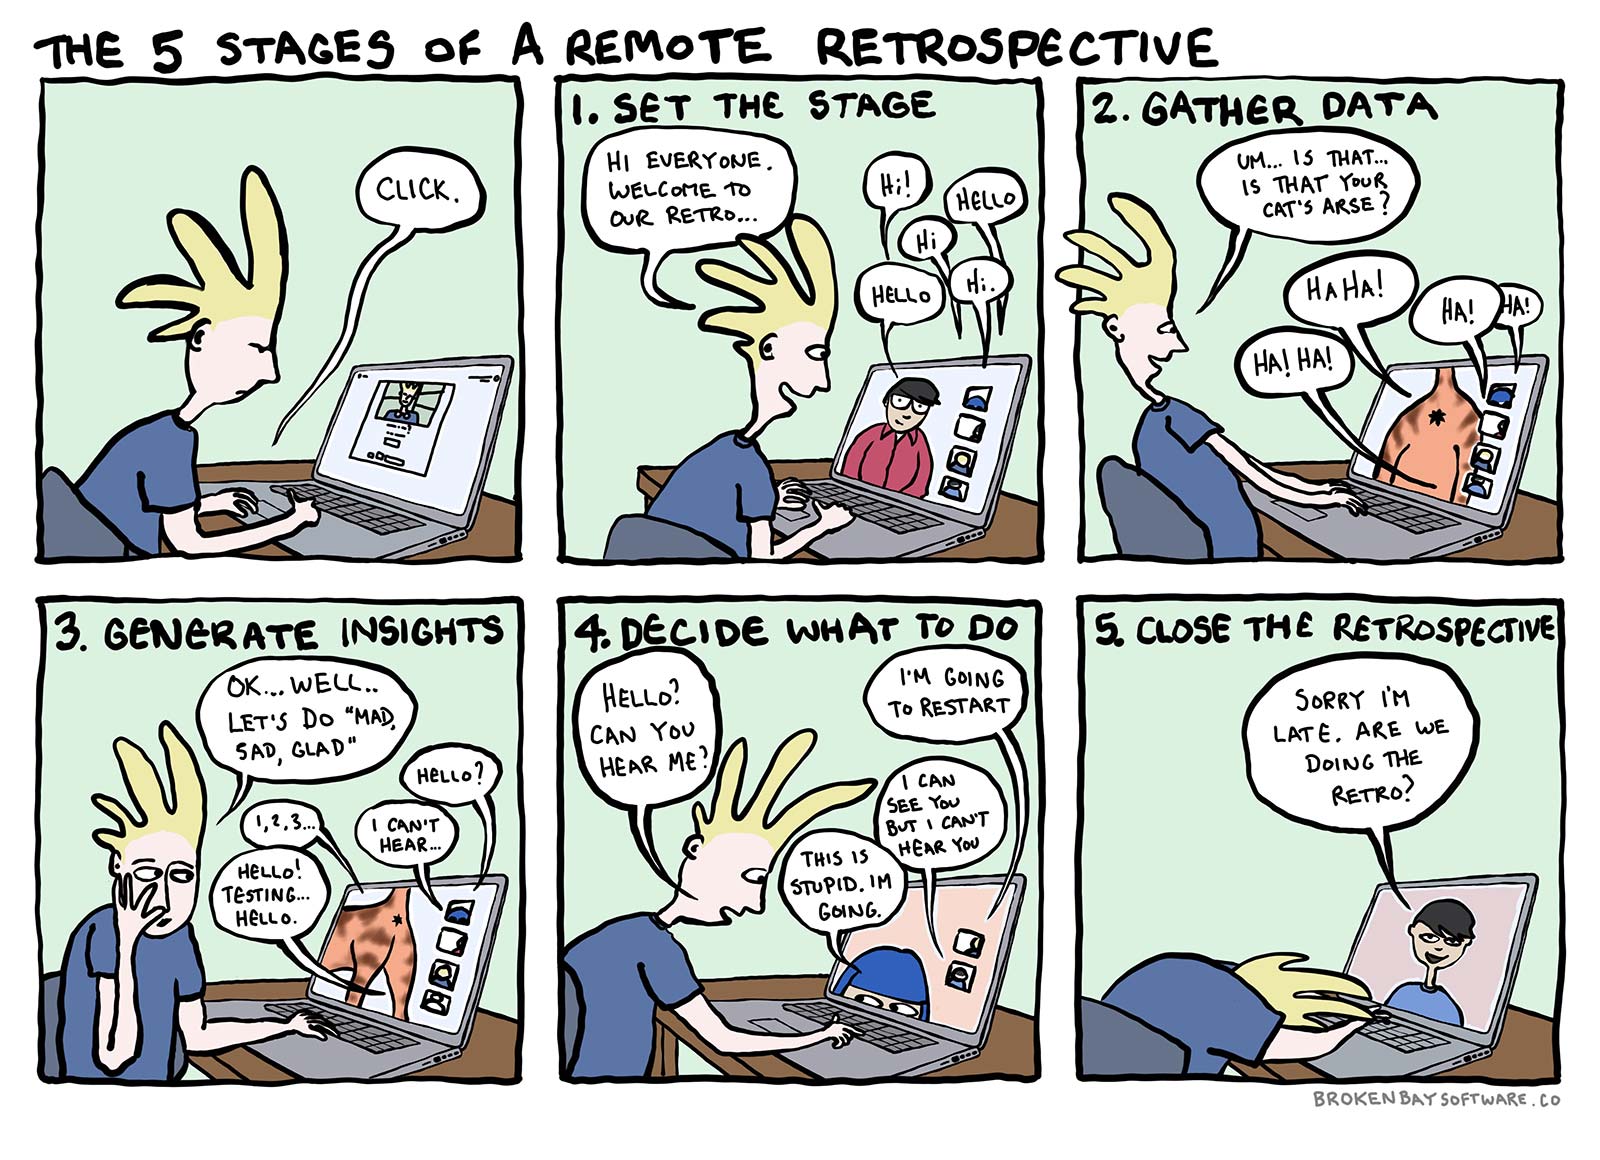 The 5 Stages of a Remote Retrospective